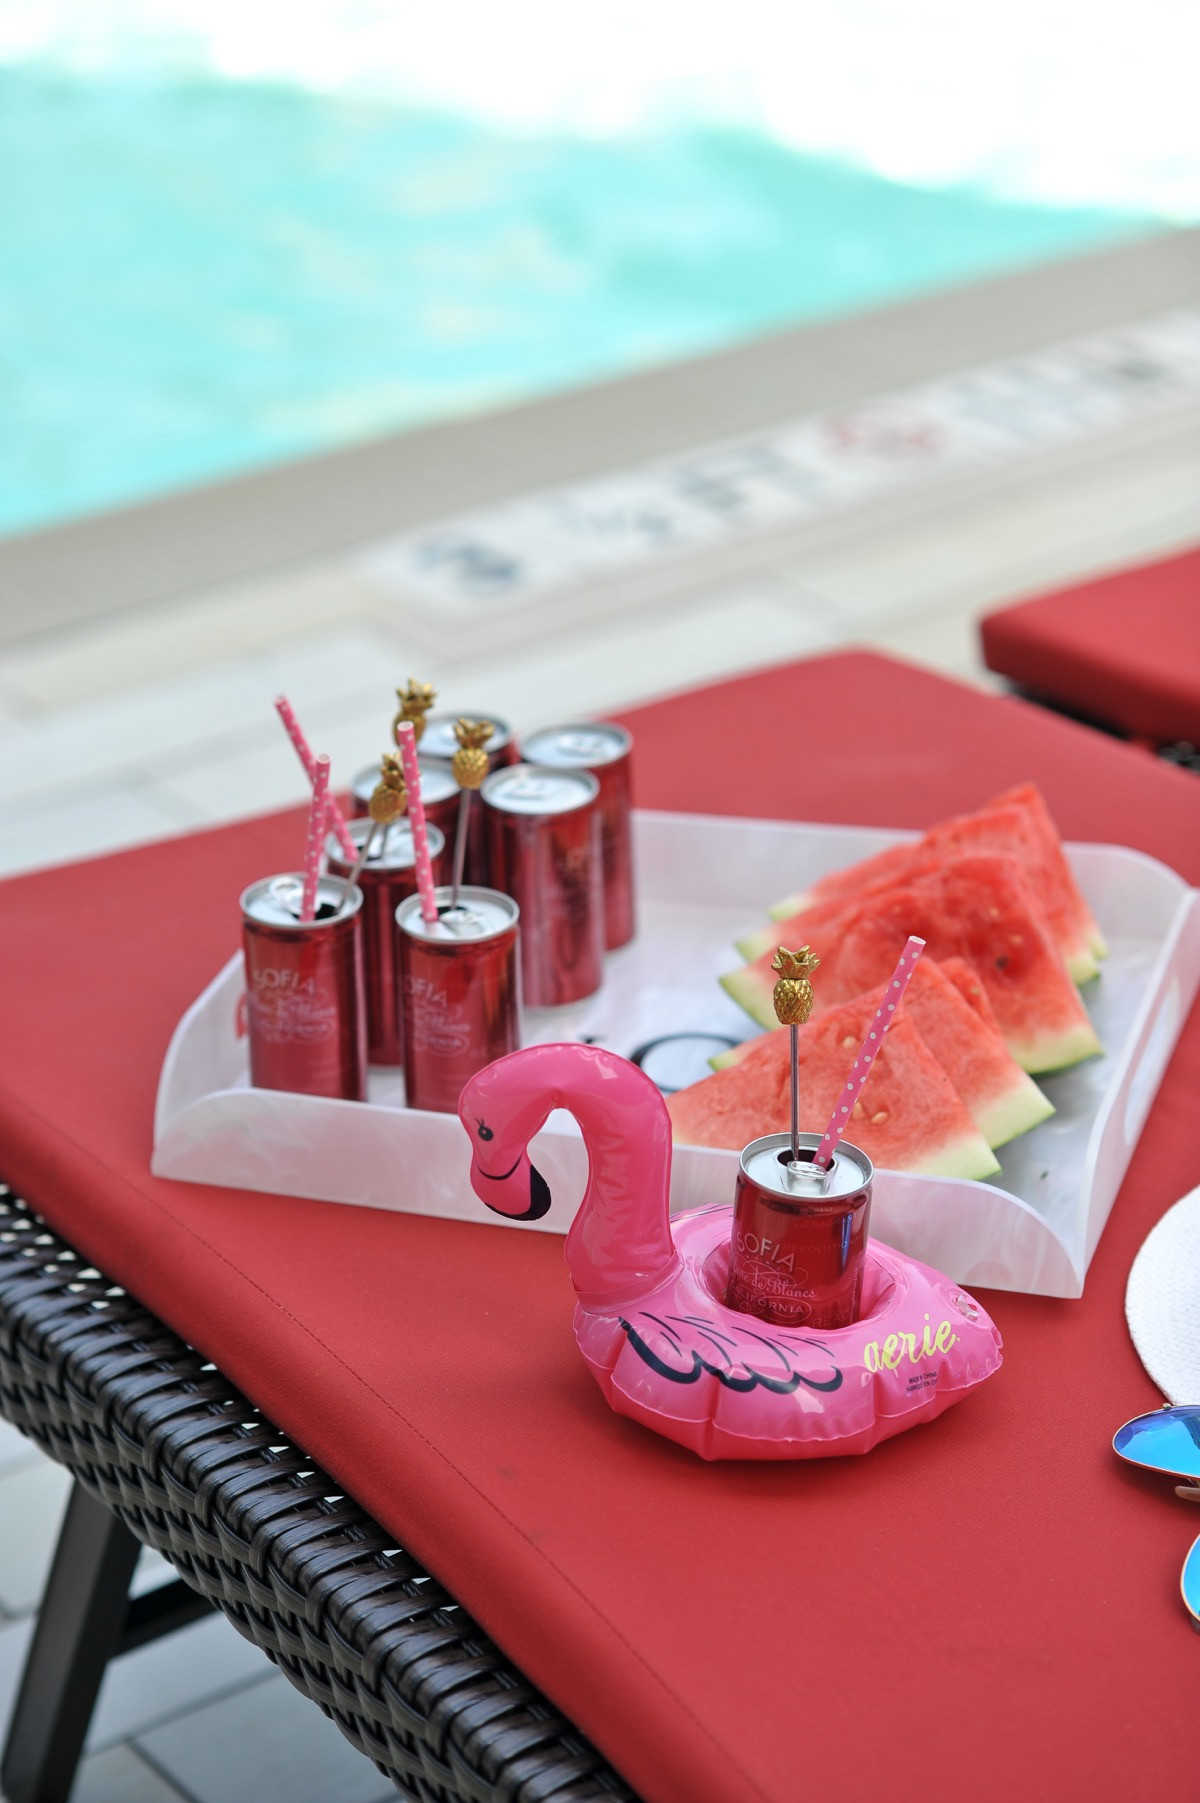 Pool Party Ideas For Birthdays
 Pool Party Ideas for Summer